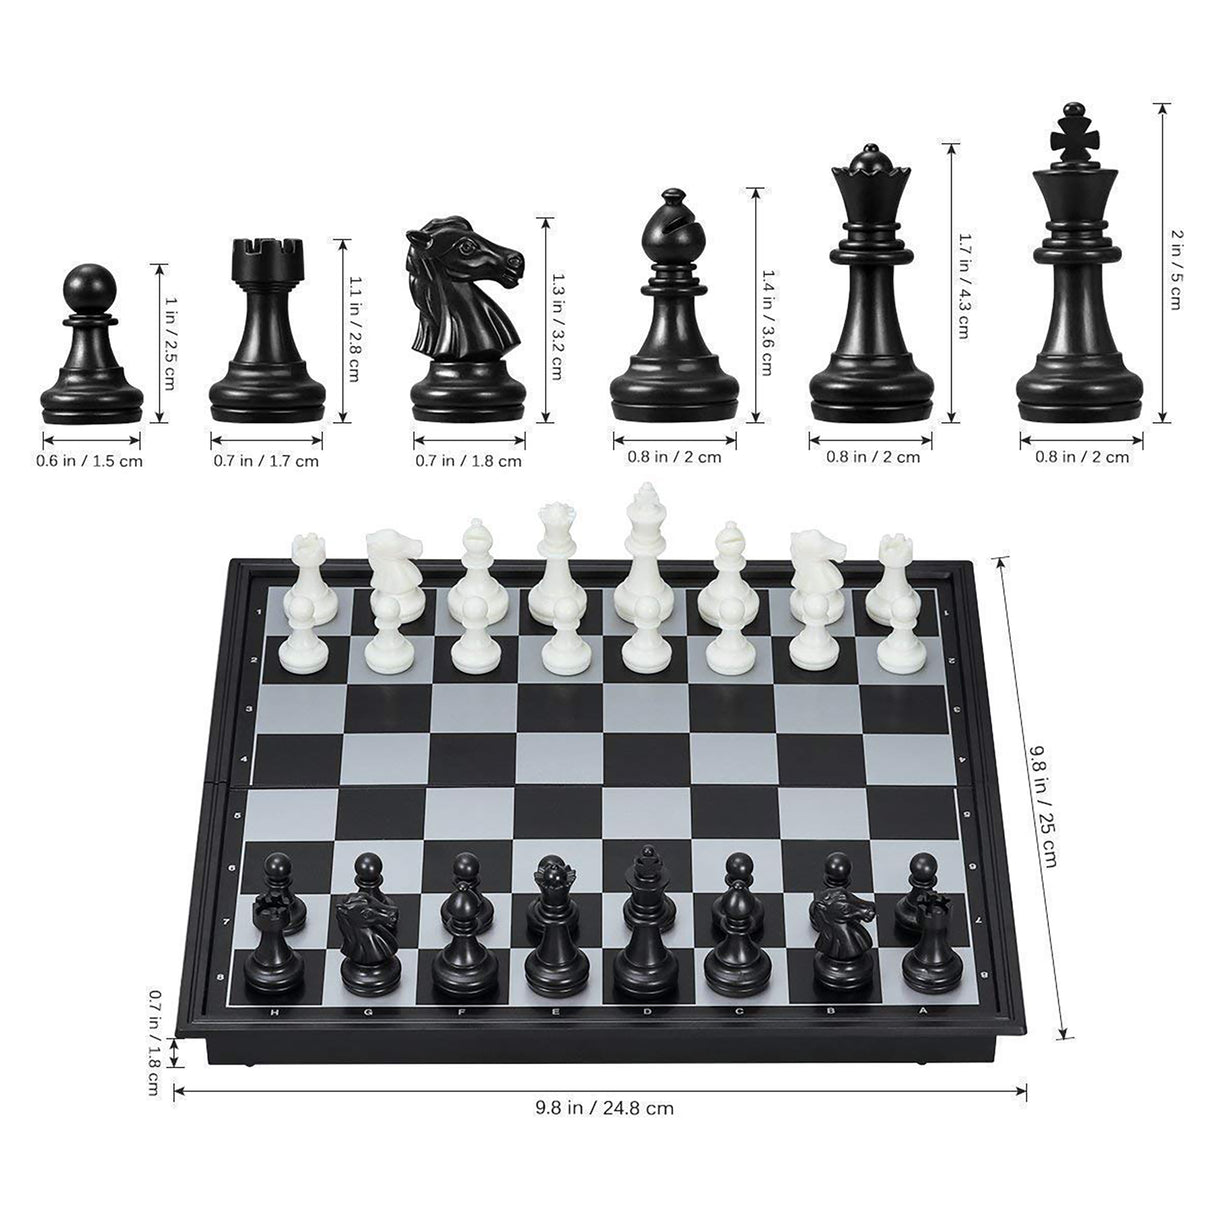 UB Magnetic Chess Set (10 inches)